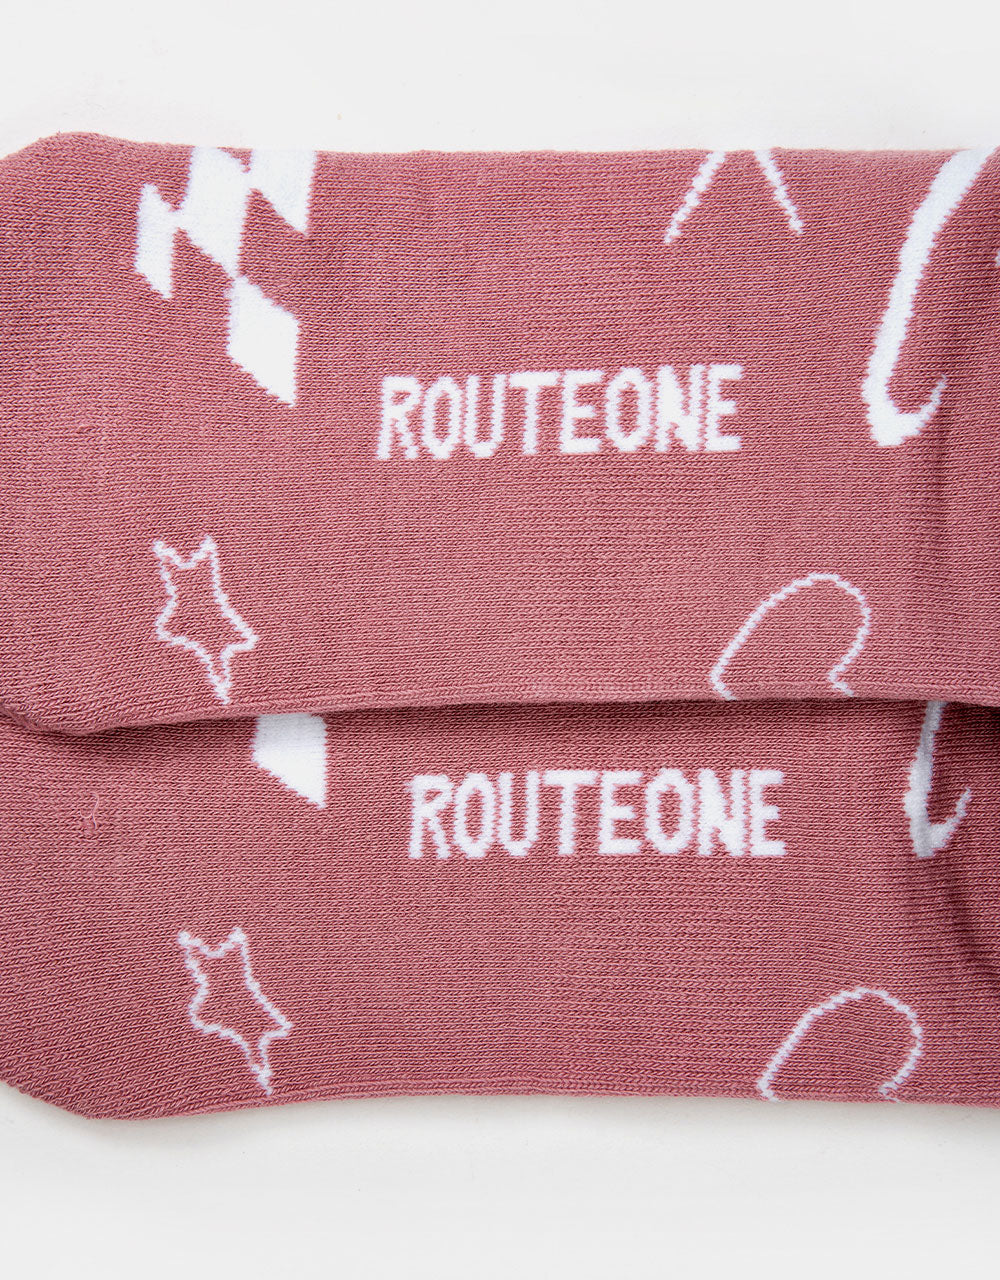 Route One R2K Crew Socks - Lilac